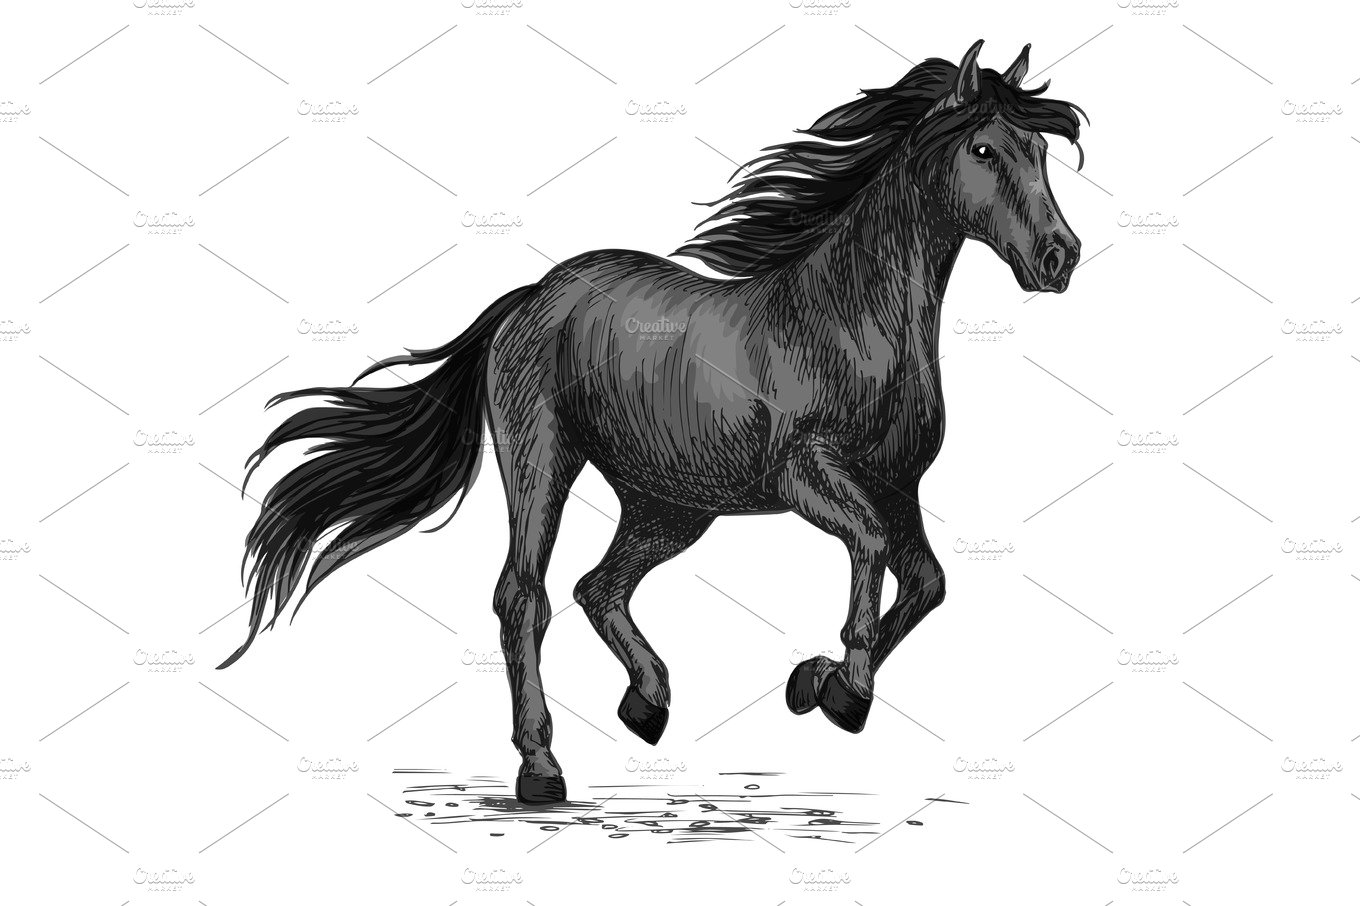 Sketched stallion gallop or horse abling cover image.